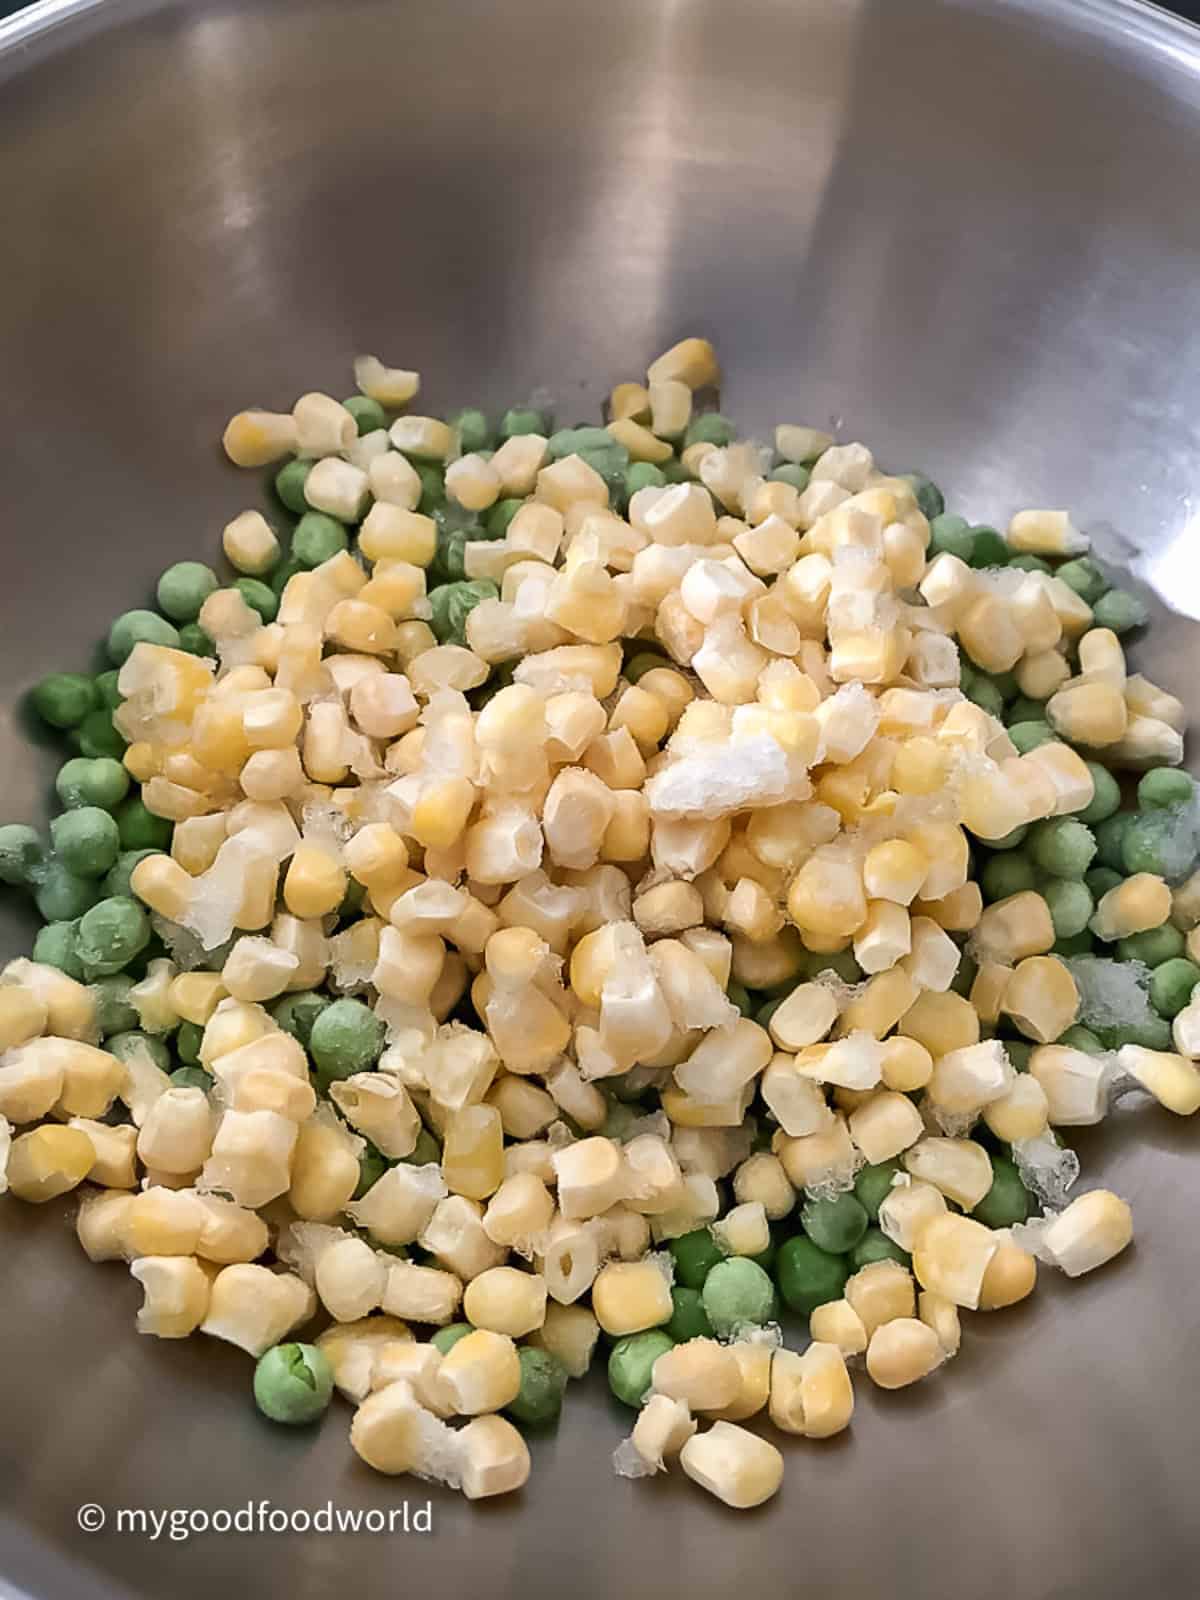 Frozen petit pois and frozen sweetcorn placed in a stainless steel wok for cooking.